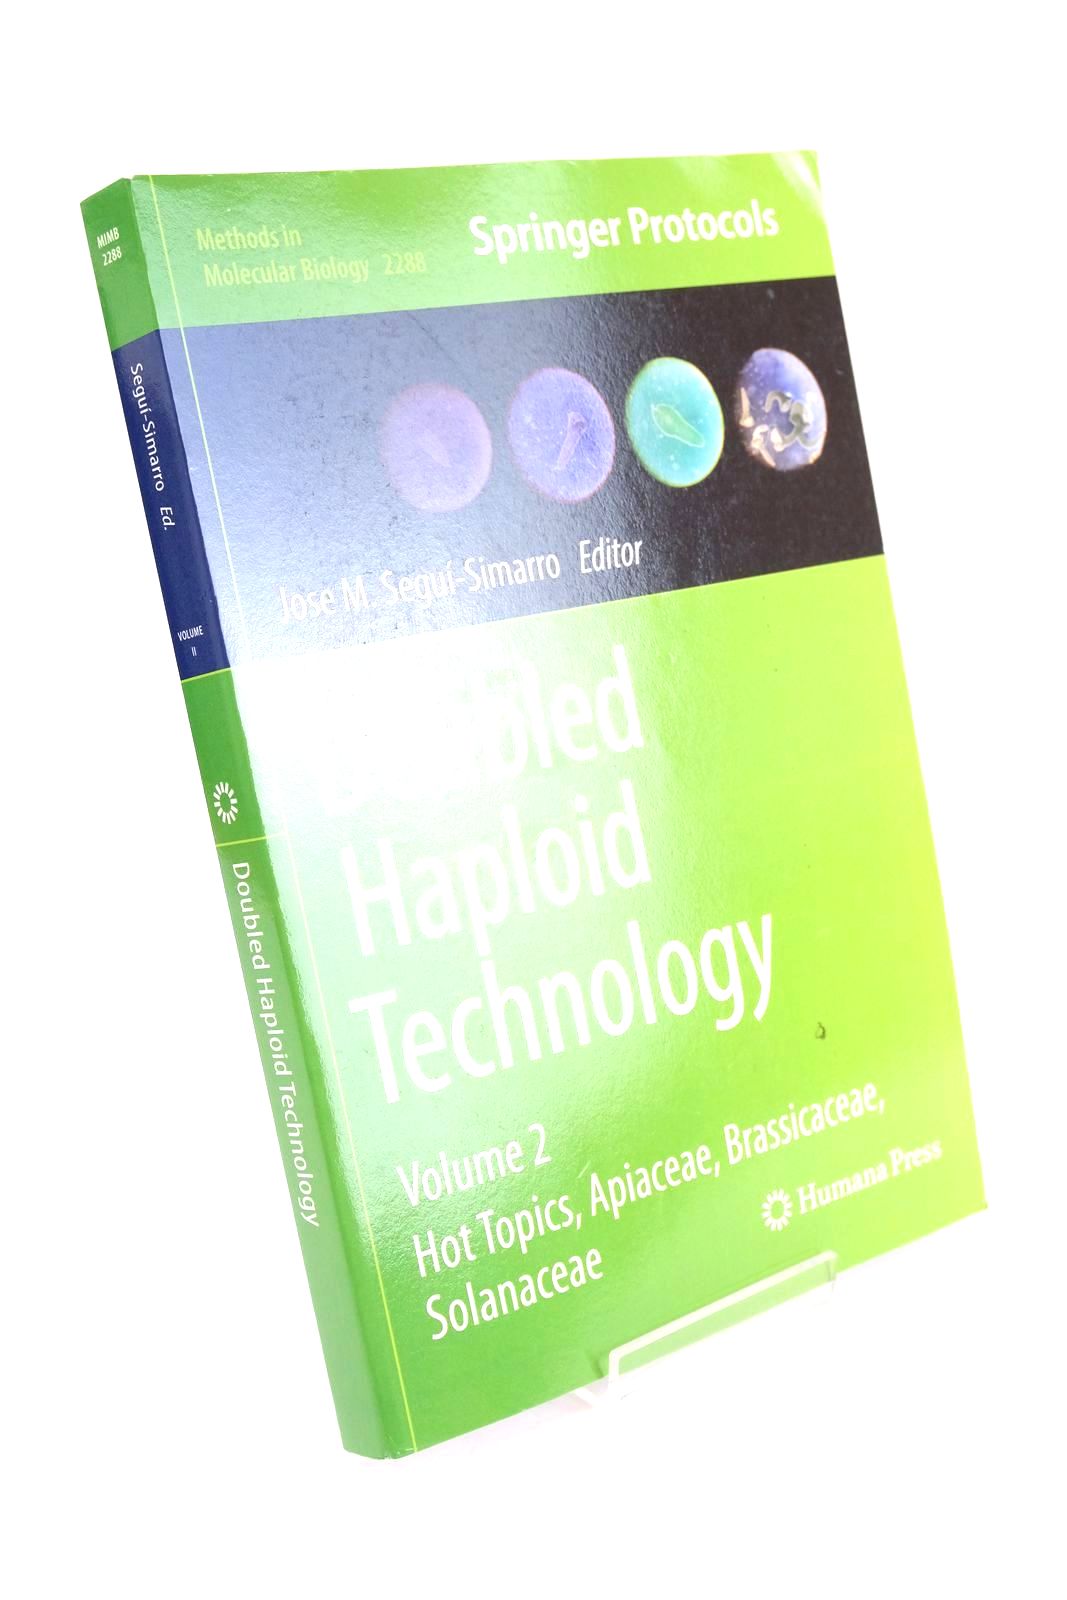 Photo of DOUBLE HAPLOID TECHNOLOGY VOLUME 2: HOT TOPICS, APIACEAE, BRASSICACEAE, SOLANACEAE written by Segui-Simarro, Jose M. published by Humana Press, Springer (STOCK CODE: 1324953)  for sale by Stella & Rose's Books